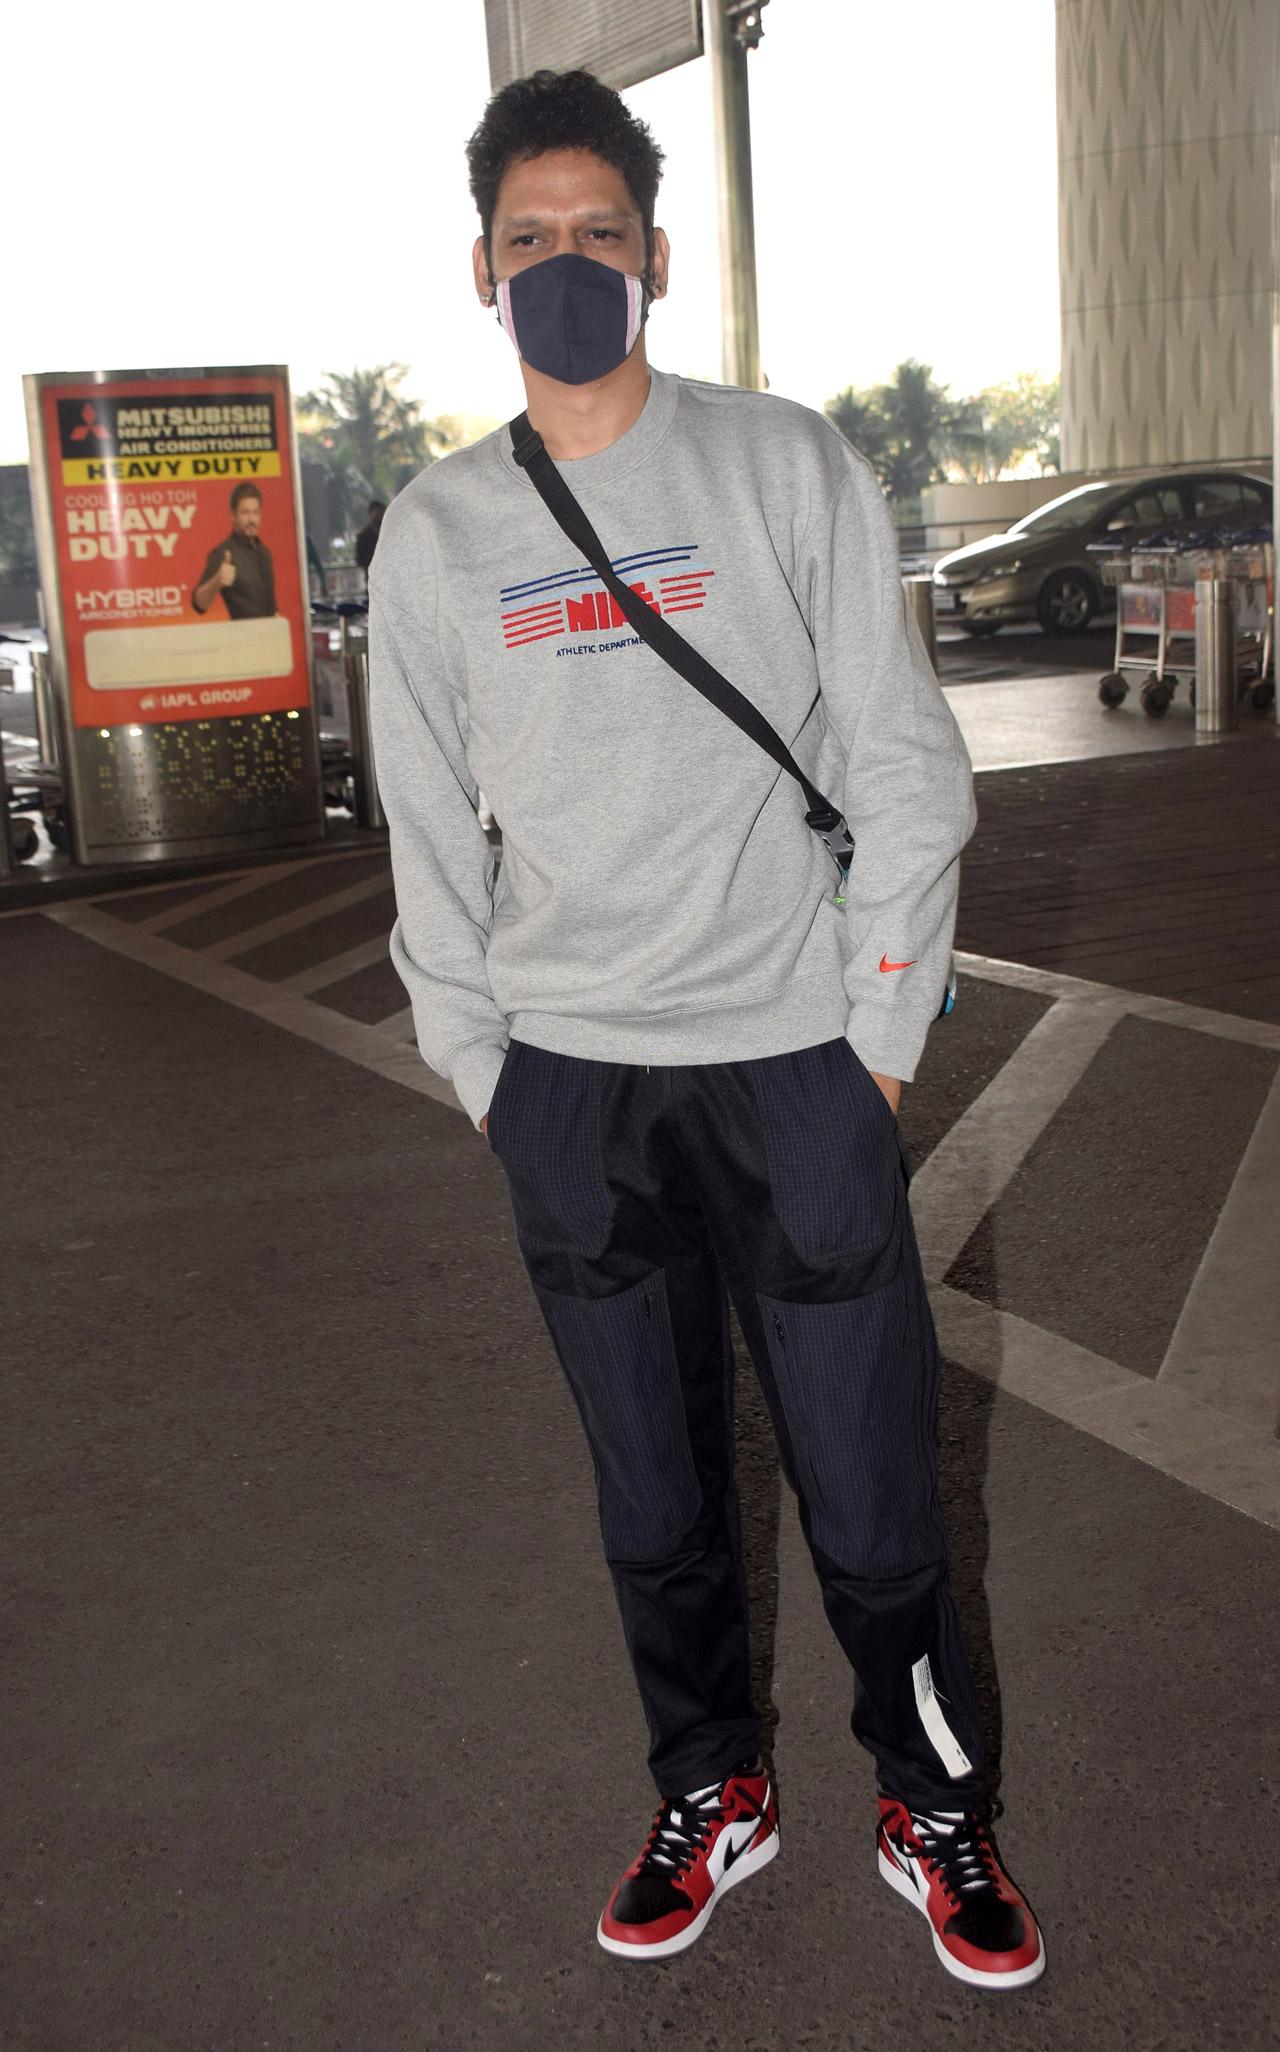 Gully Boy actor Vijay Verma was also clicked at Mumbai airport. The actor opted for a grey sweatshirt, paired with blue track pants and sports shoes.